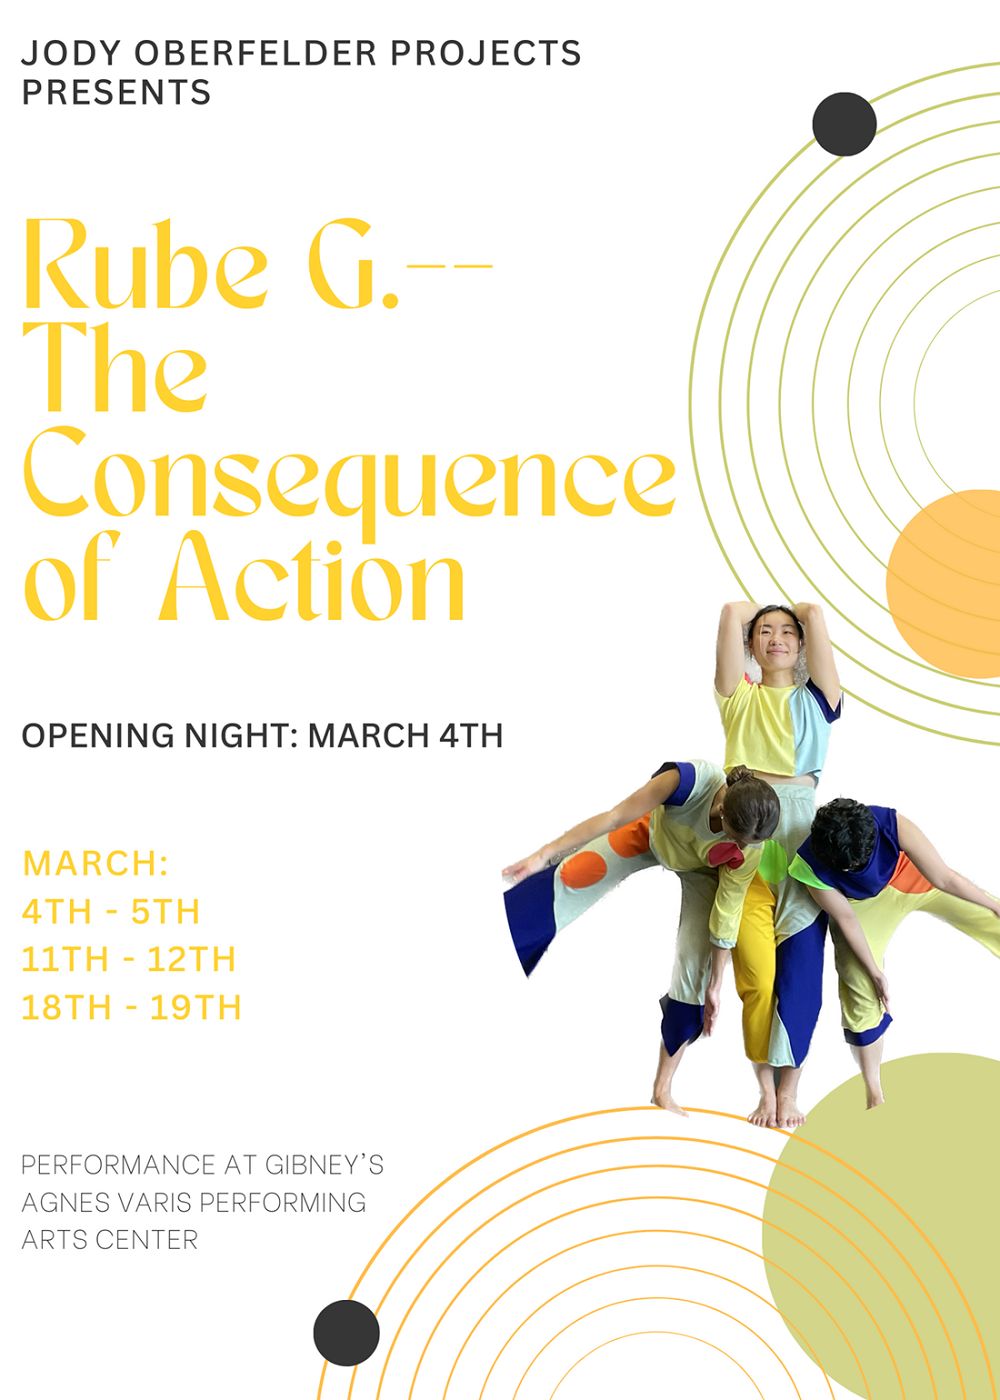 <strong>Jody Oberfelder Projects presents the world premiere of Rube. G – The Consequences of Action</strong>